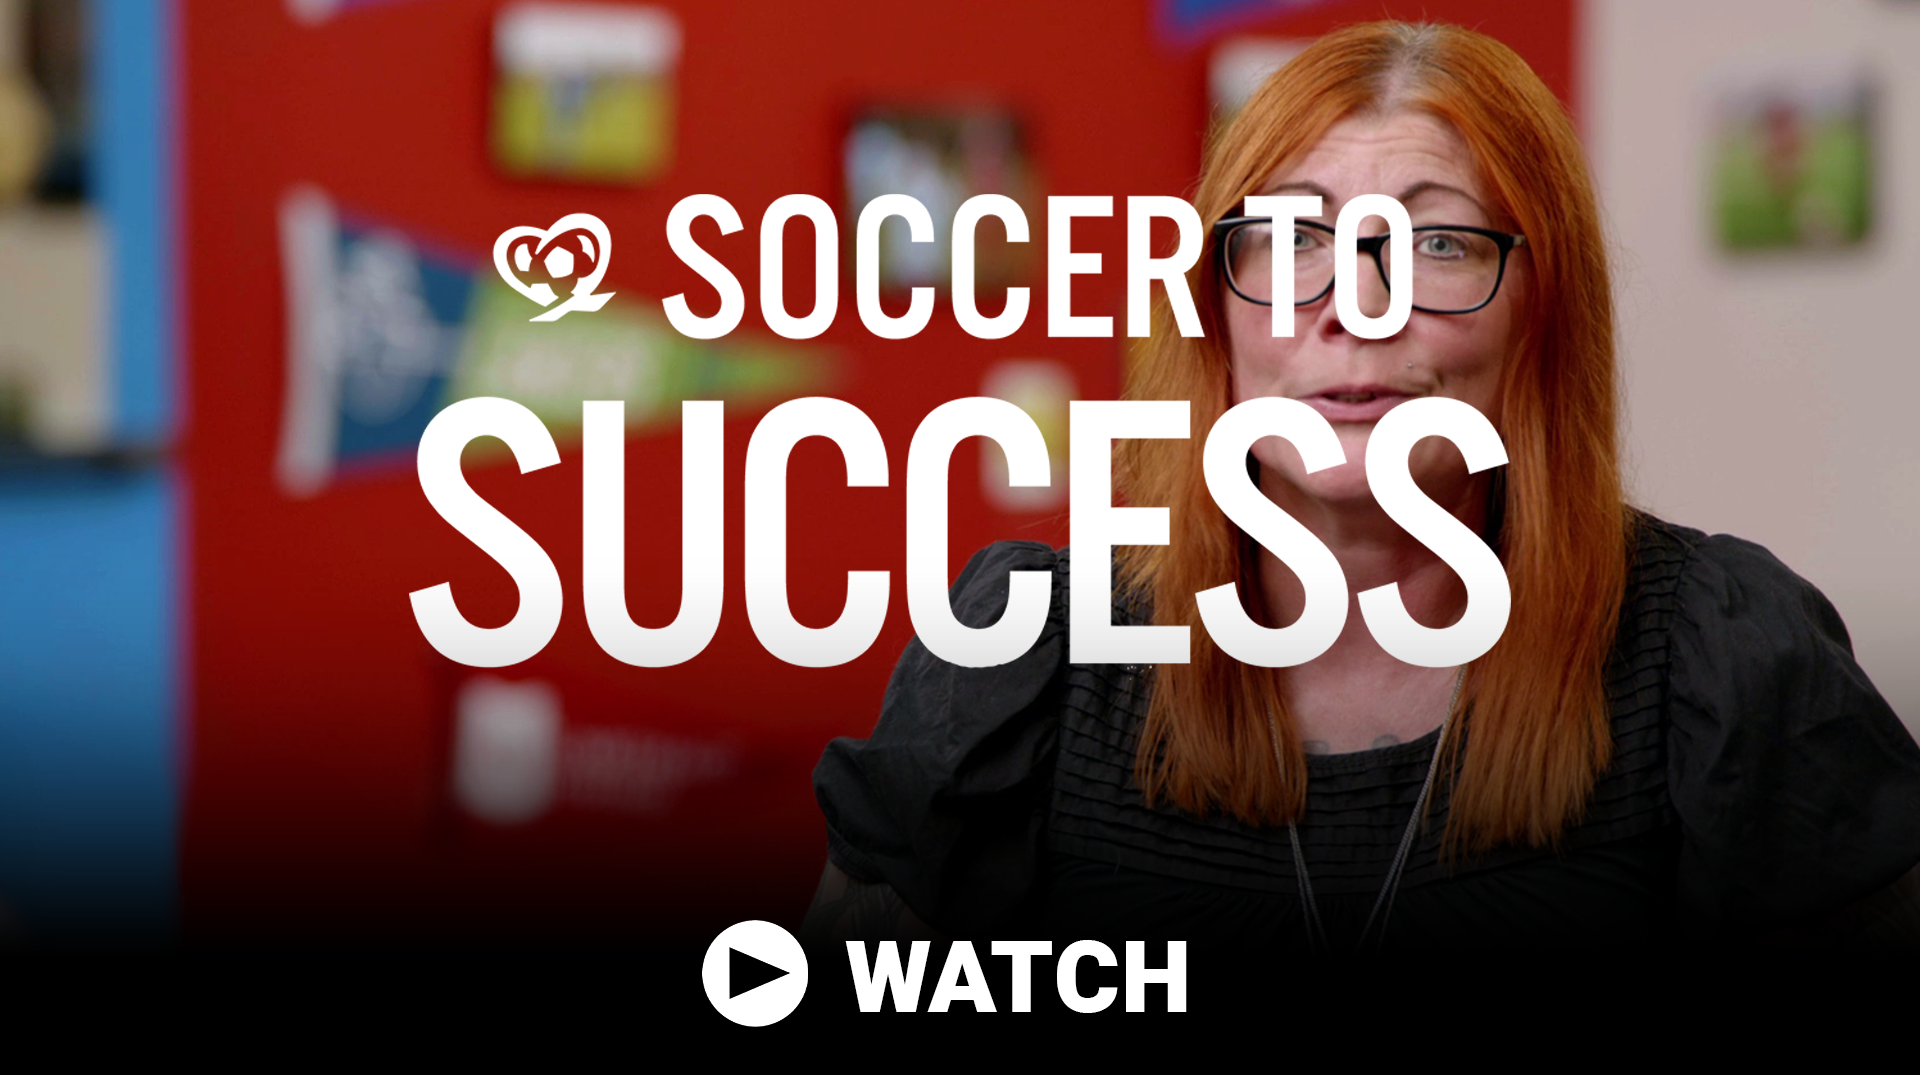 Soccer to Success Video 2